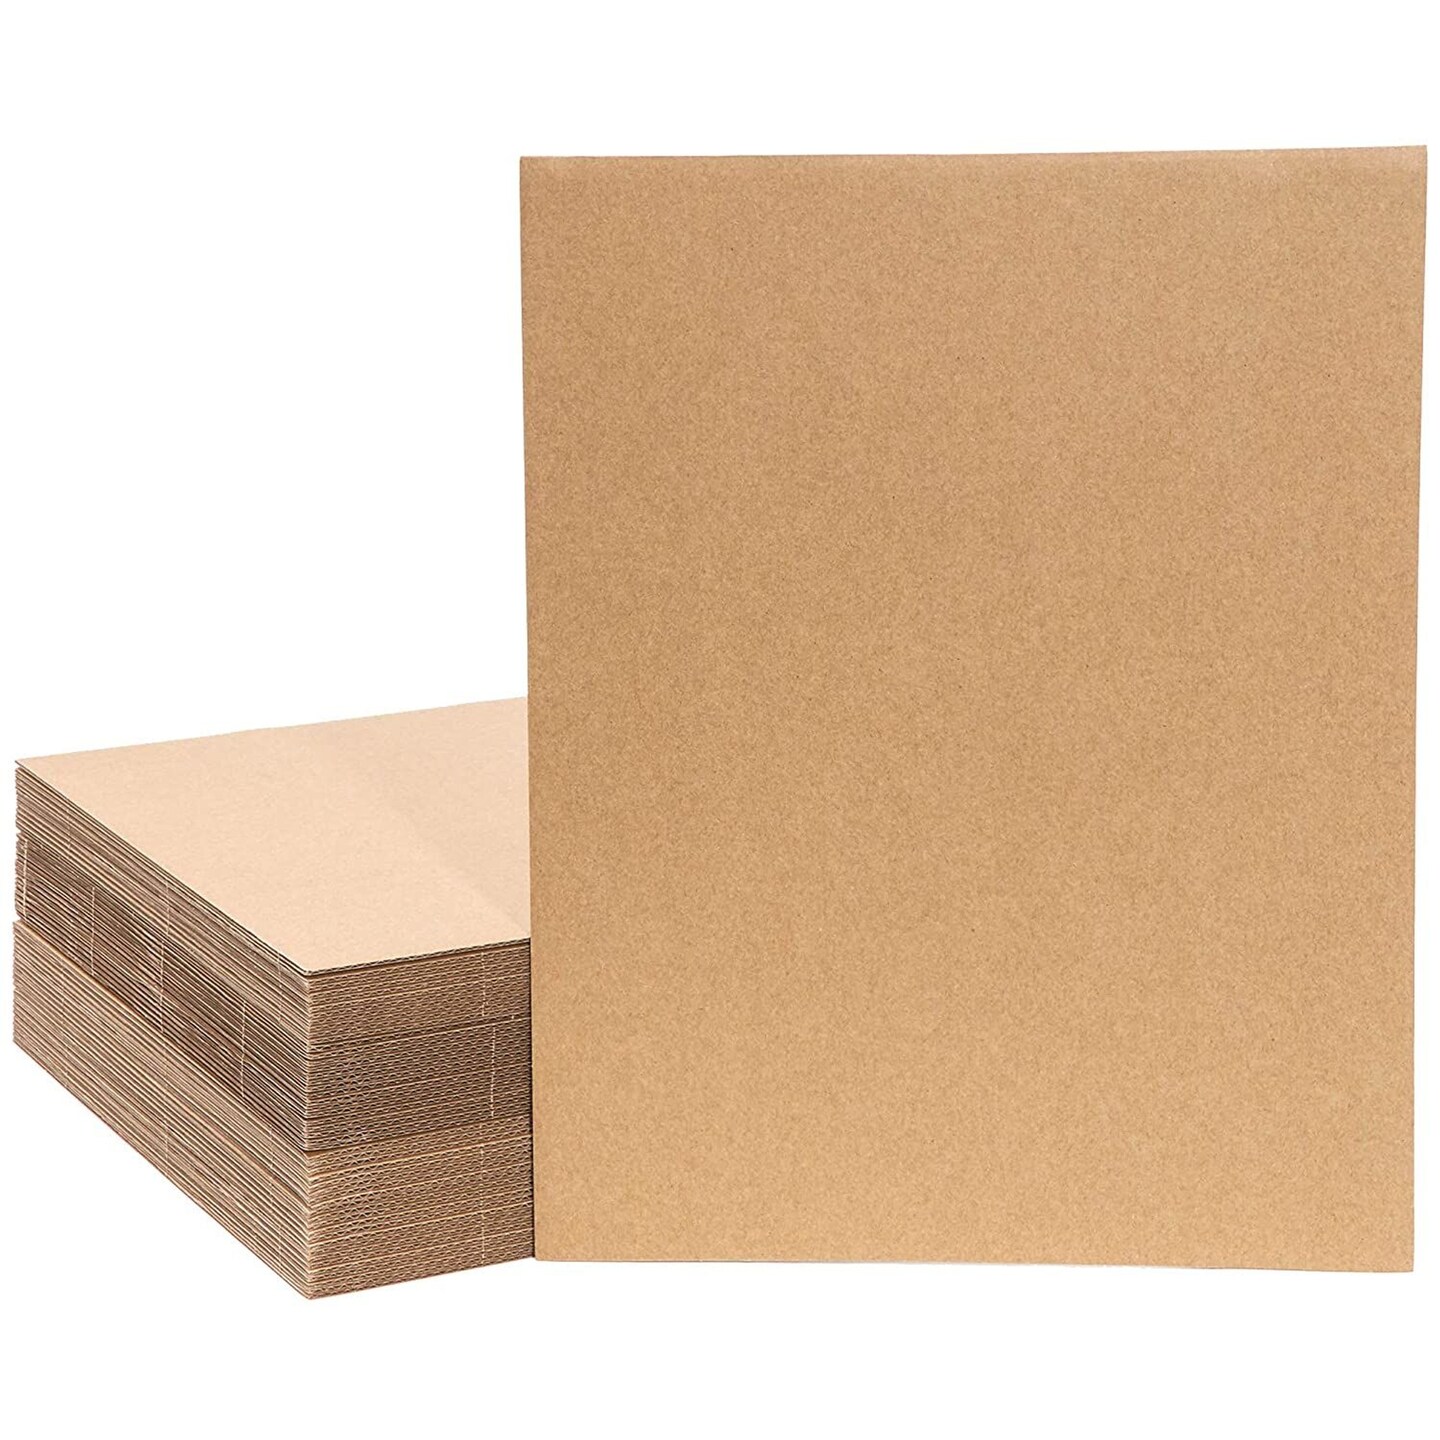 50 Pack Corrugated Cardboard Sheets for Mailers, Flat Packaging